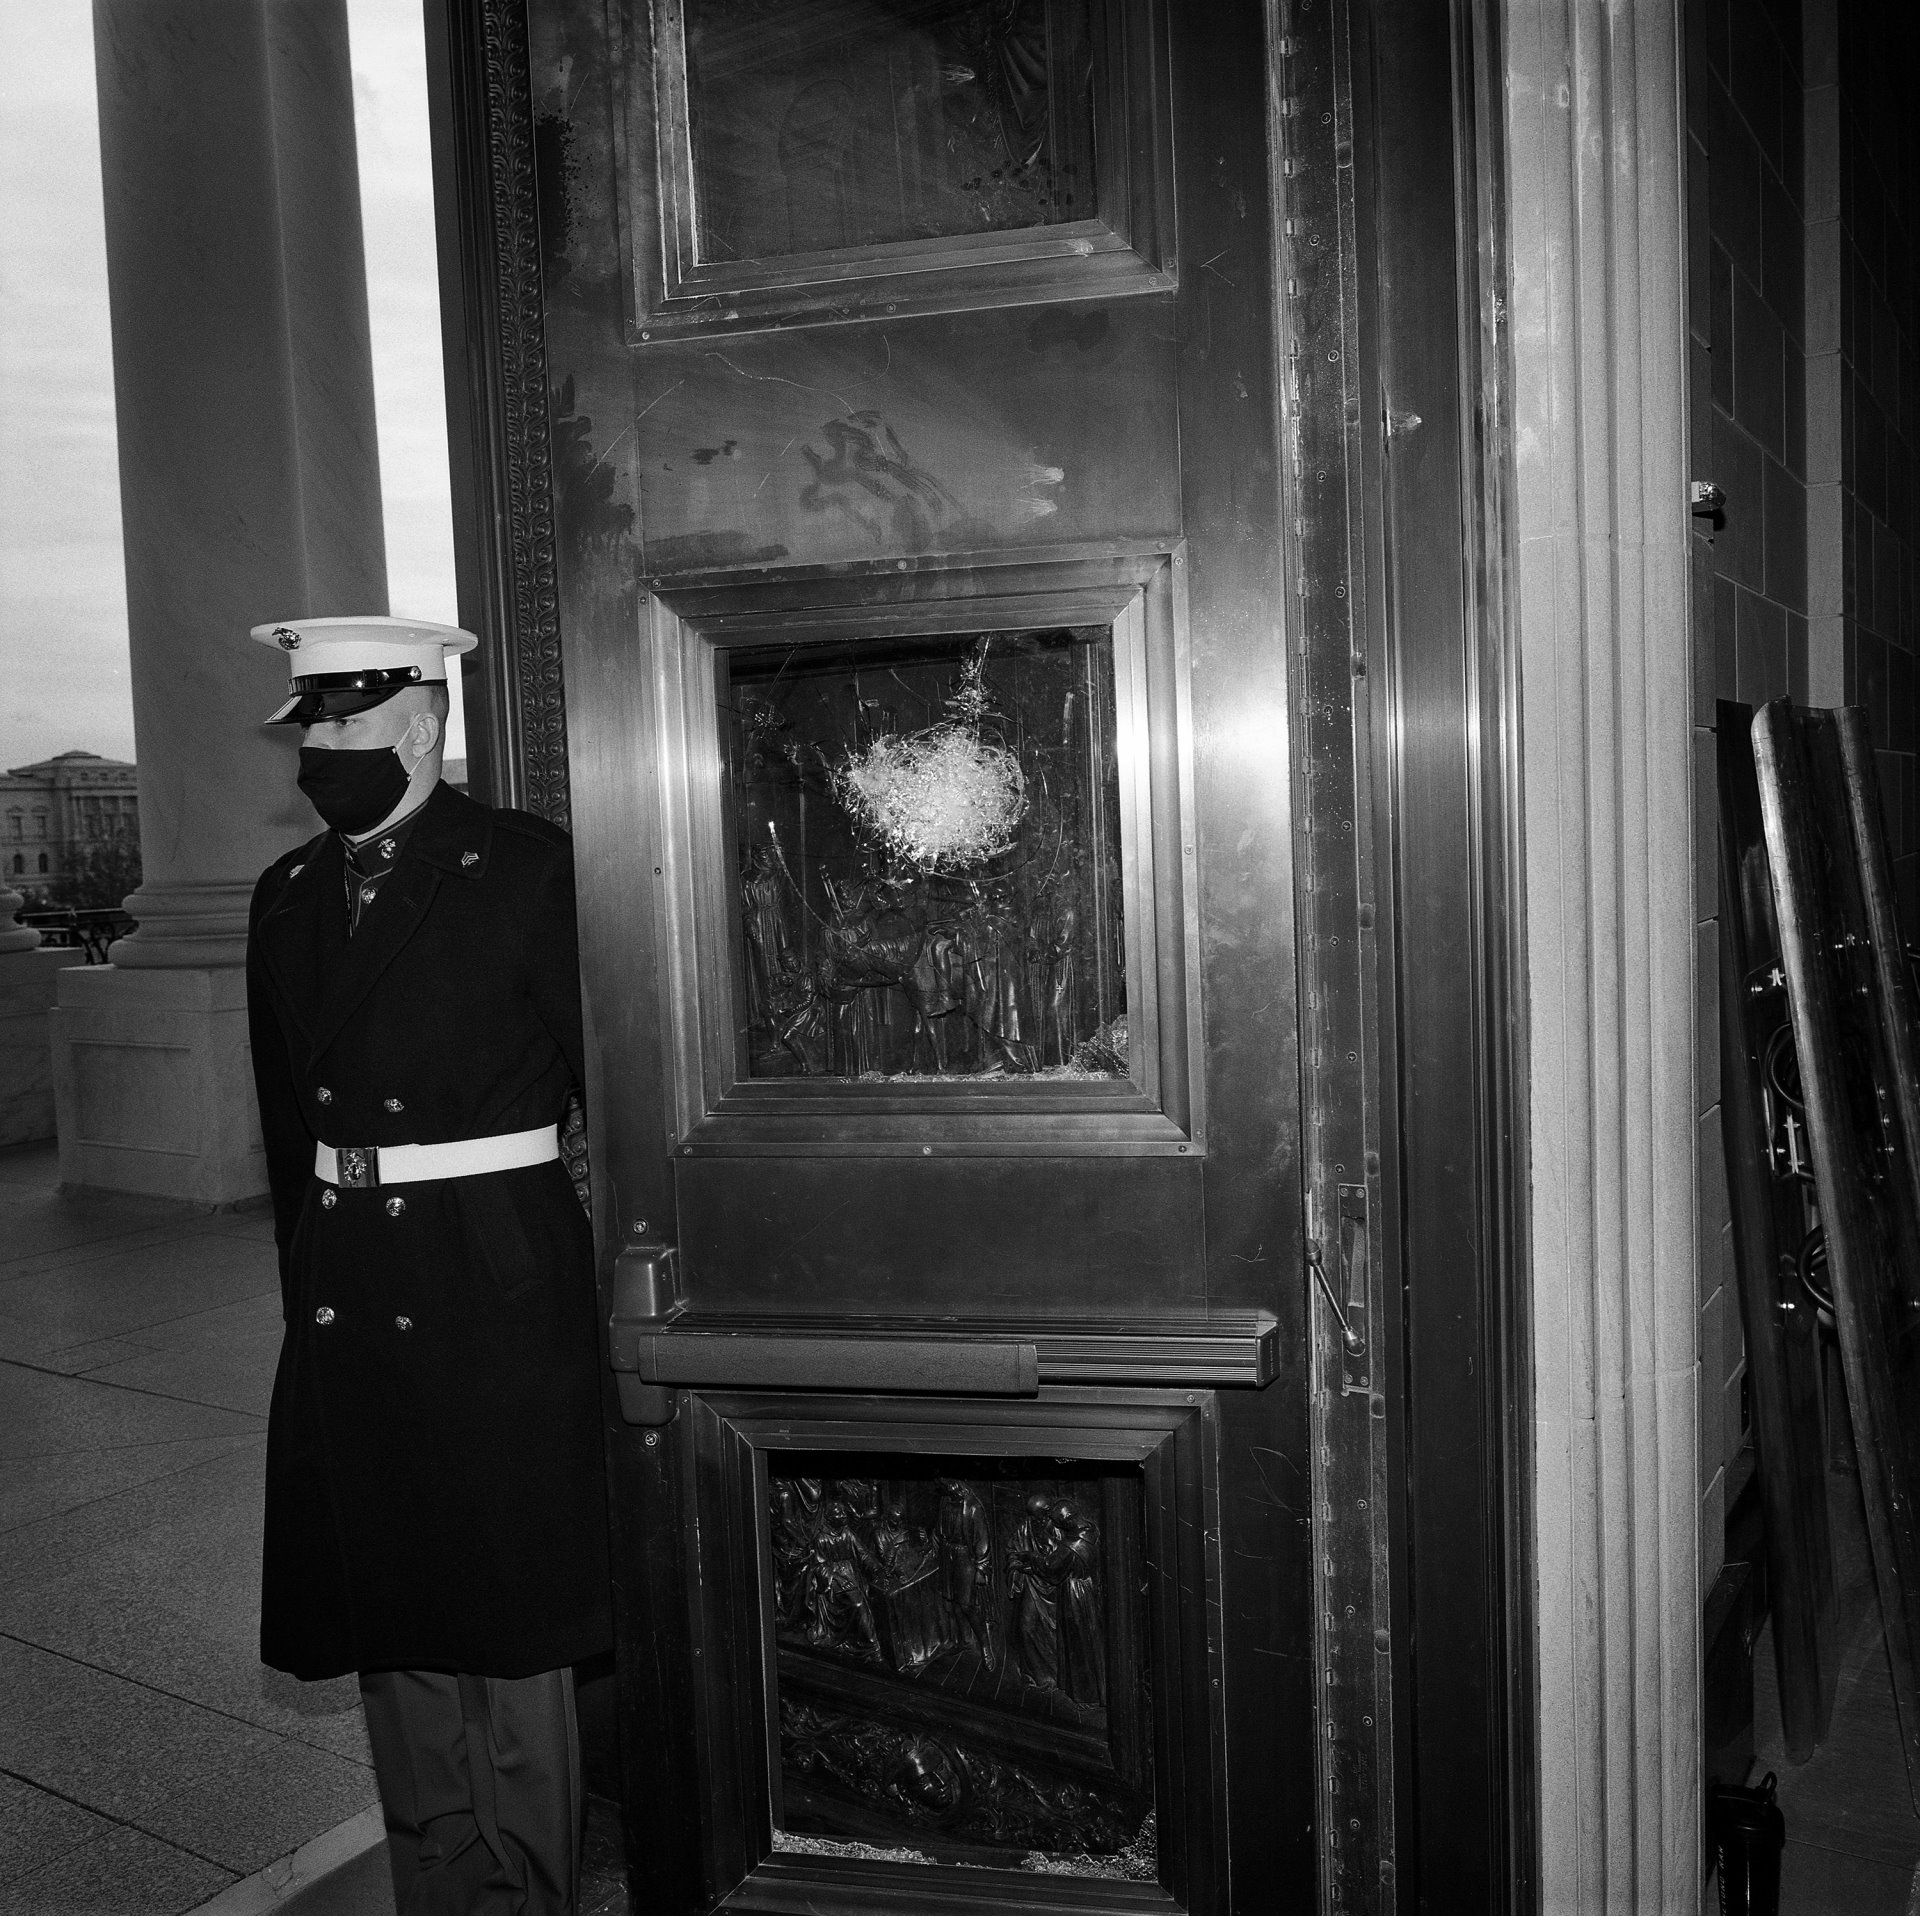 A US Marine from the White House practices opening doors at the Capitol Building, in Washington DC, USA, on 19 January 2021, the day before the inauguration of Joe Biden as president and Kamala Harris as vice-president. This was one of several doors damaged when protesters breached the Capitol Building in an attempt to stop the certification of the 2020 presidential election.